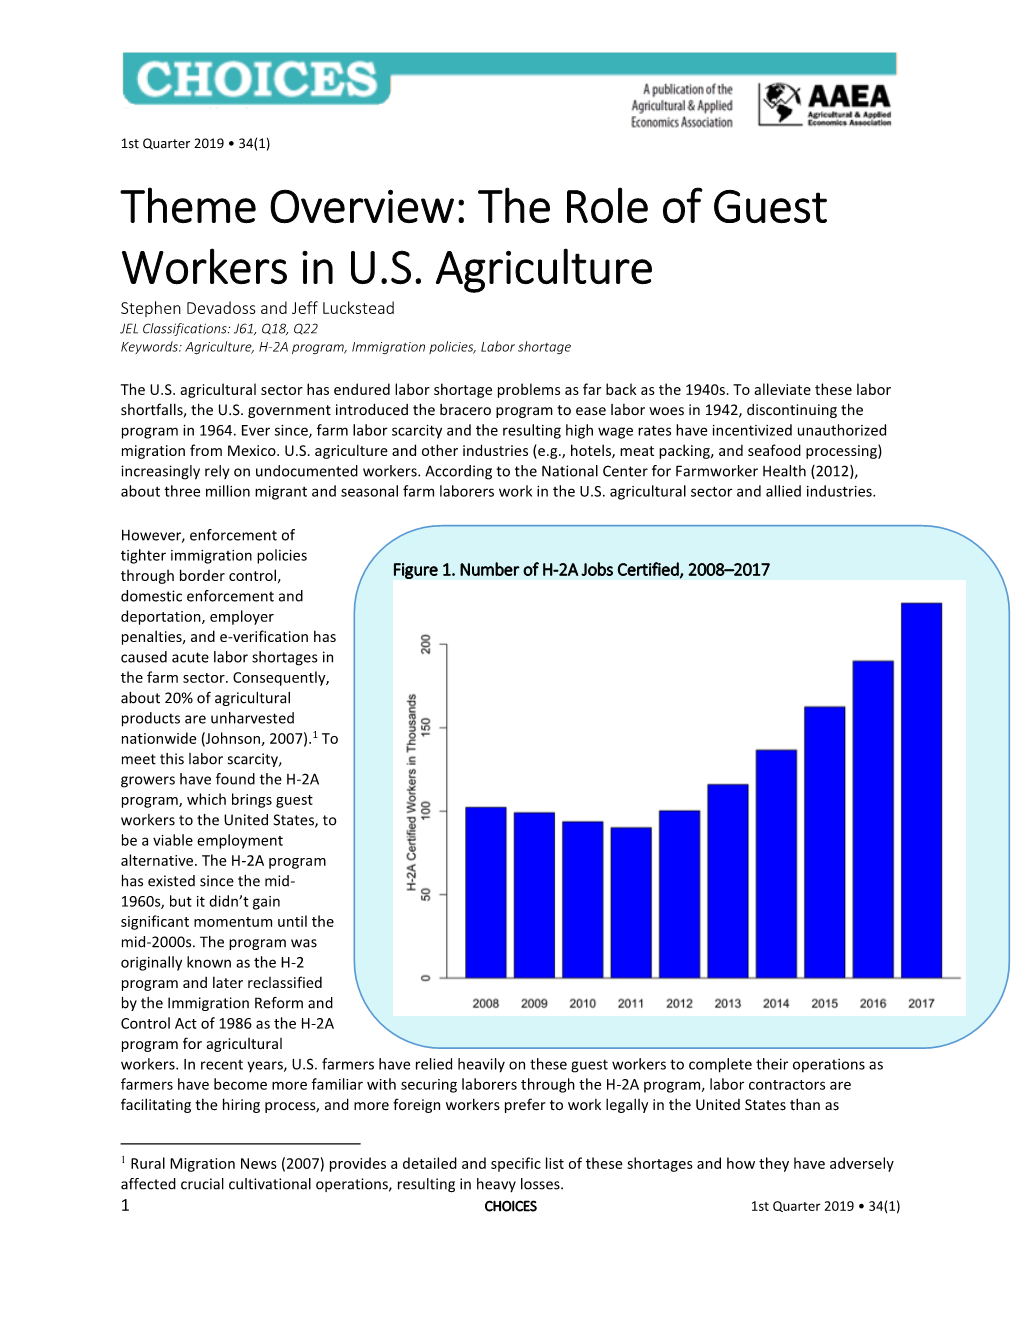 Theme Overview: the Role of Guest Workers in U.S. Agriculture